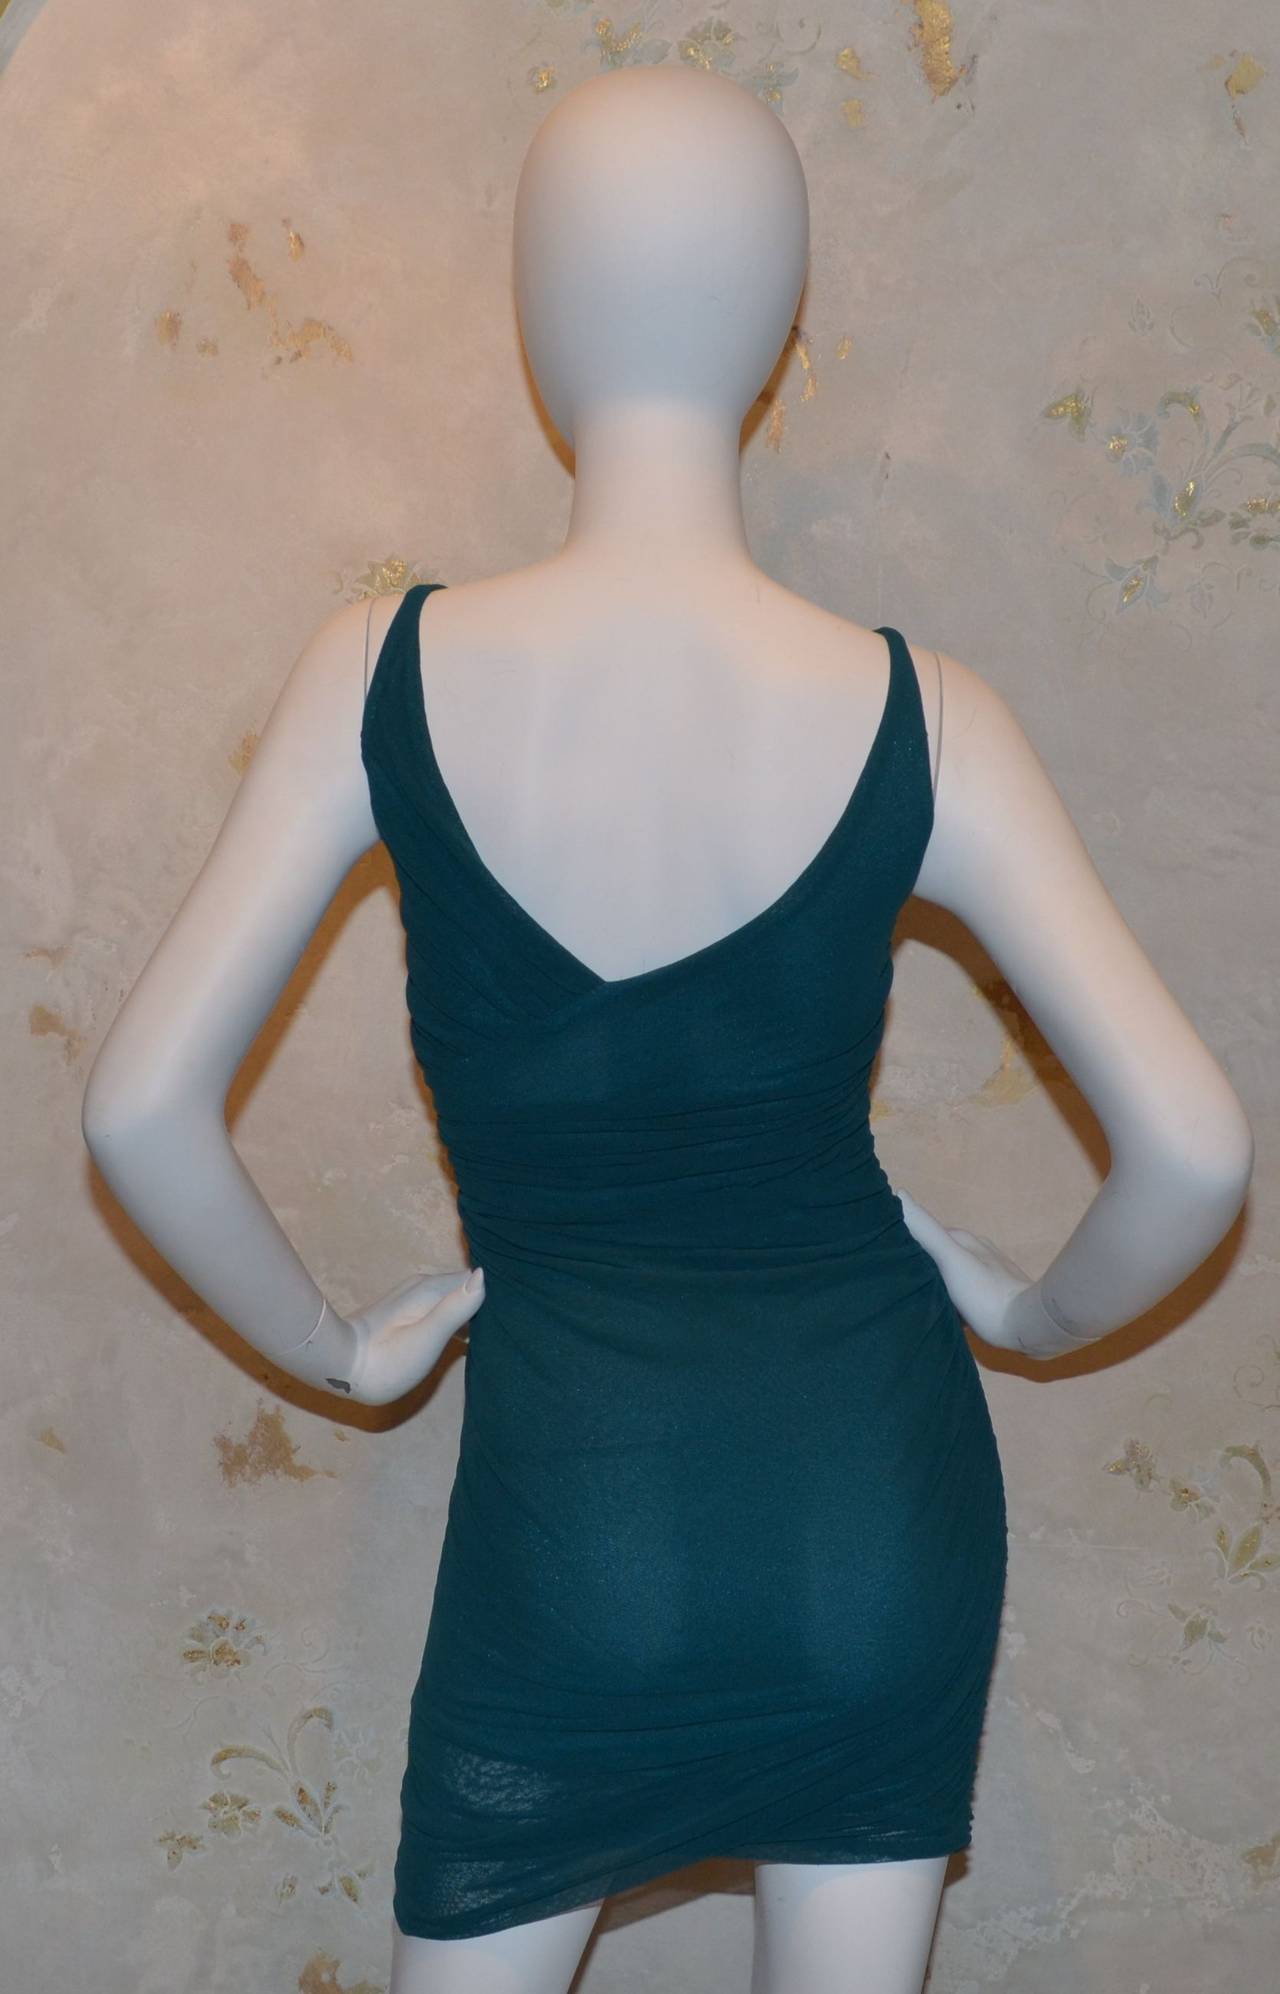 Giorgio di Sant Angelo 1980s mesh knit stretch lycra, stocking knit body con featherweight tank dress. Dress is a small size and fits our mannequin which measures a 34" bust, 25" waist, and 37" hip (measured in inches). The dress